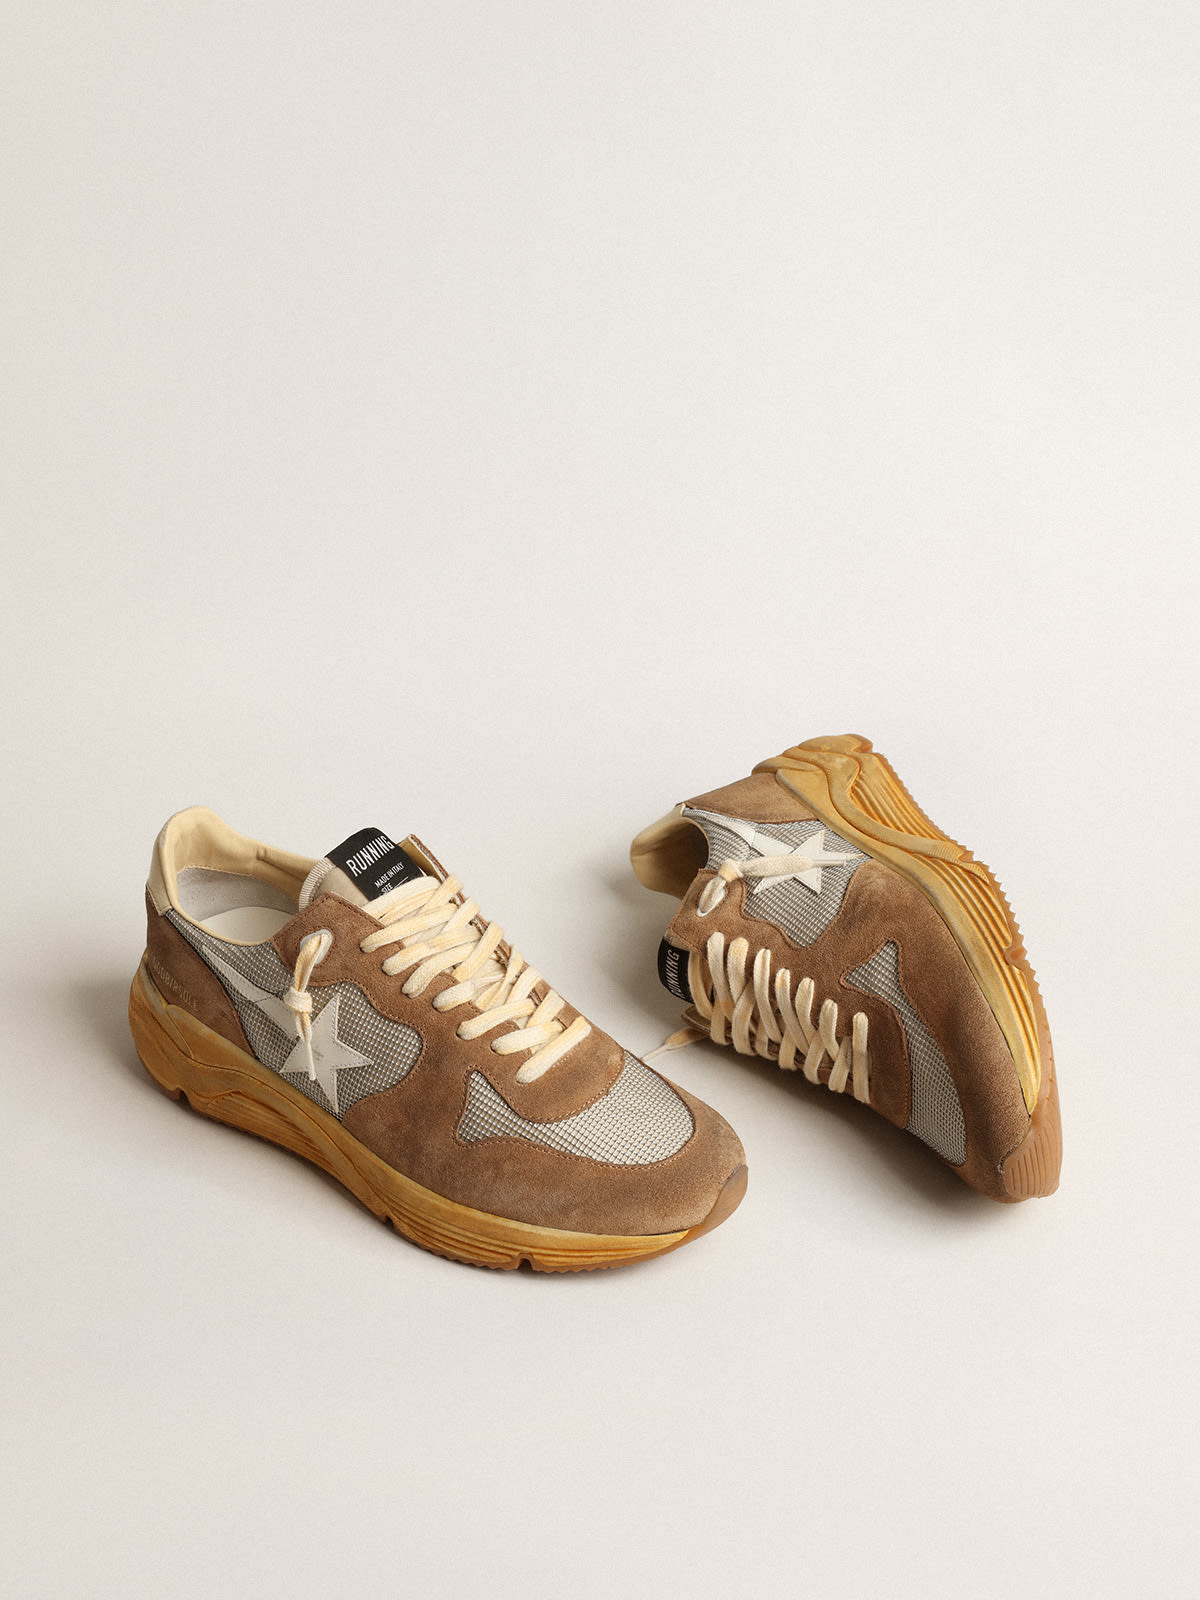 Golden Goose - Running Sole in silver mesh and tobacco suede with a white star in 